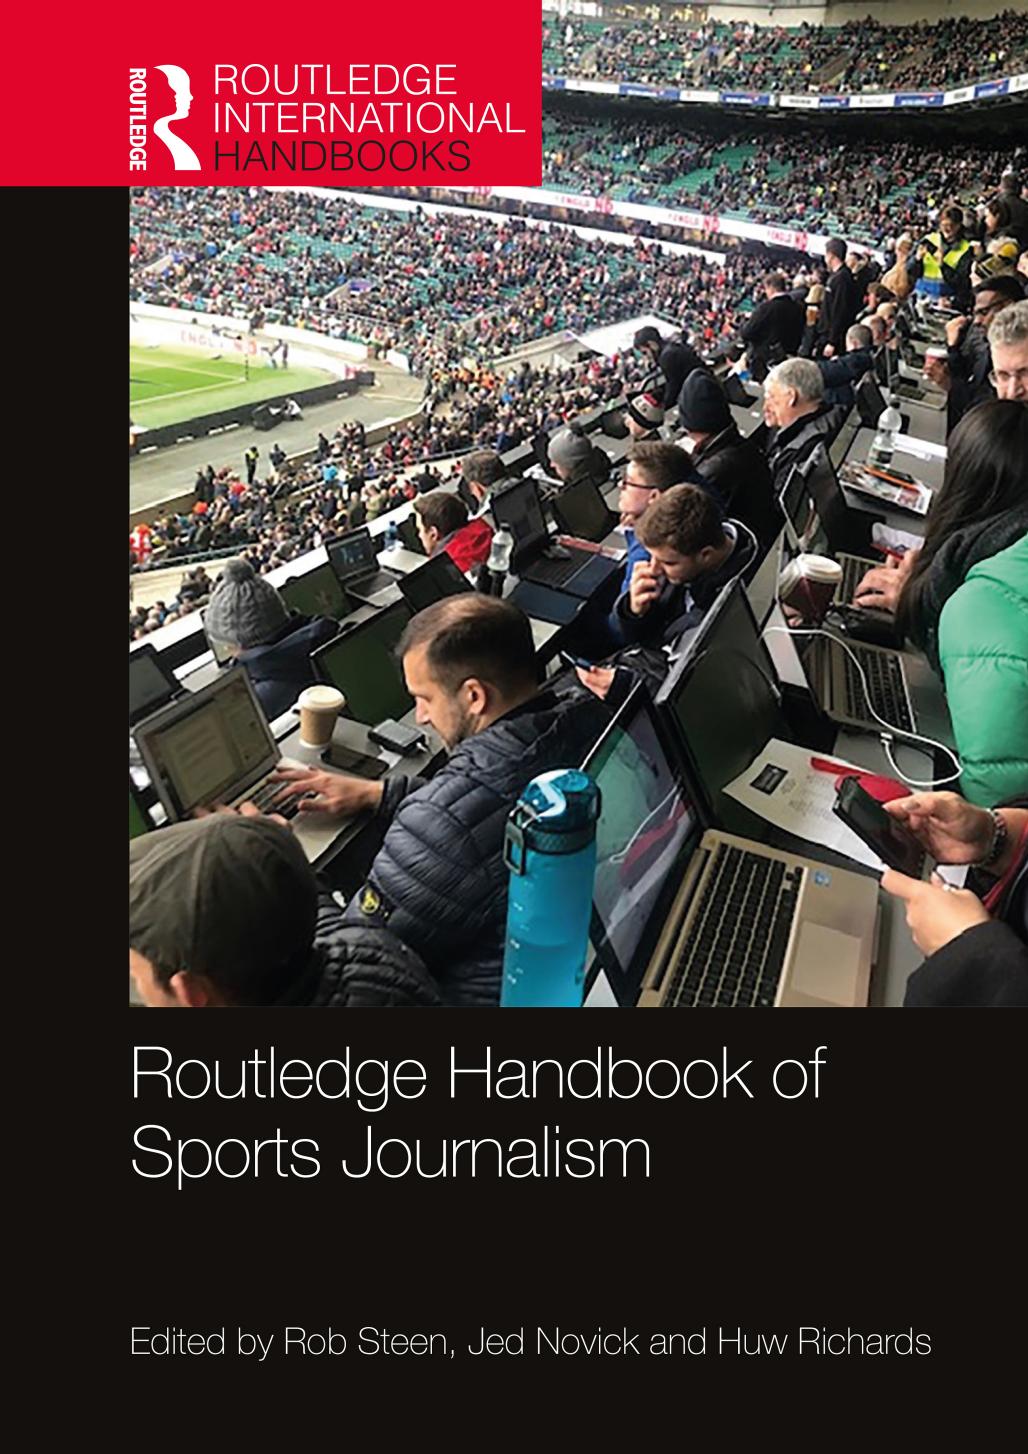 Routledge Handbook of Sports Journalism by Rob Steen Jed Novick Huw Richards